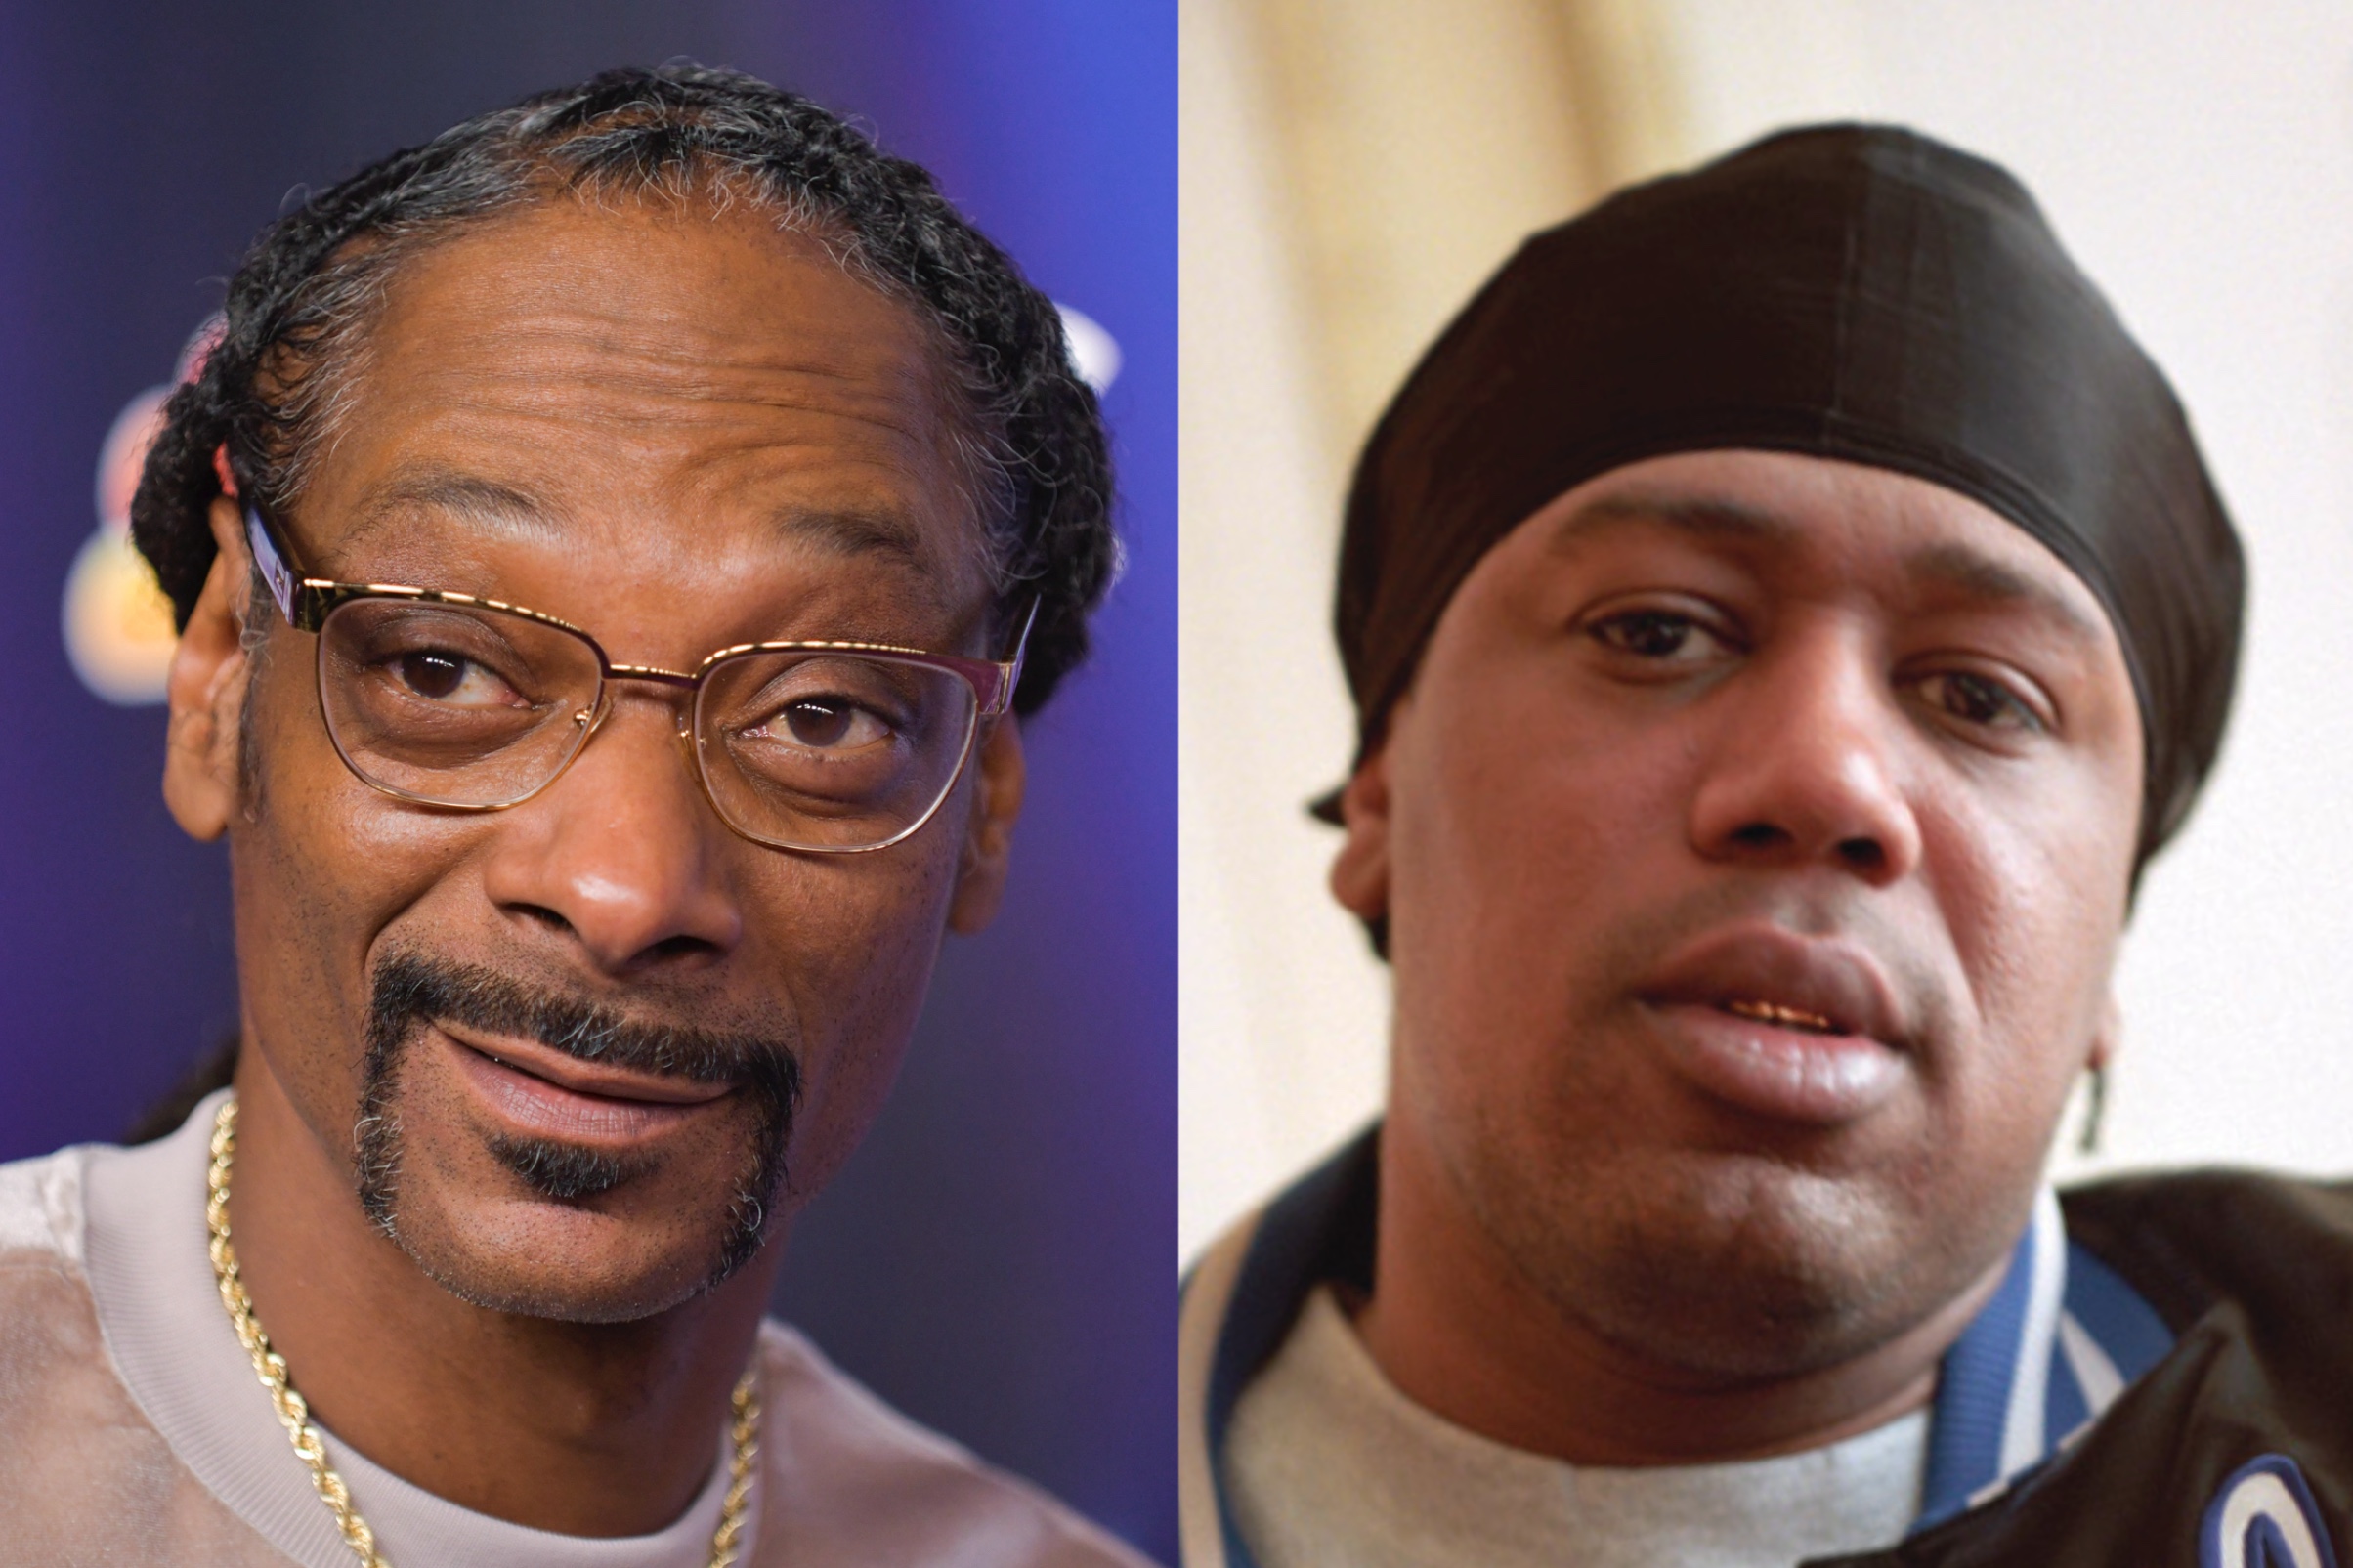 Snoop Dogg And Master P Sue Walmart For Allegedly Keeping Snoop